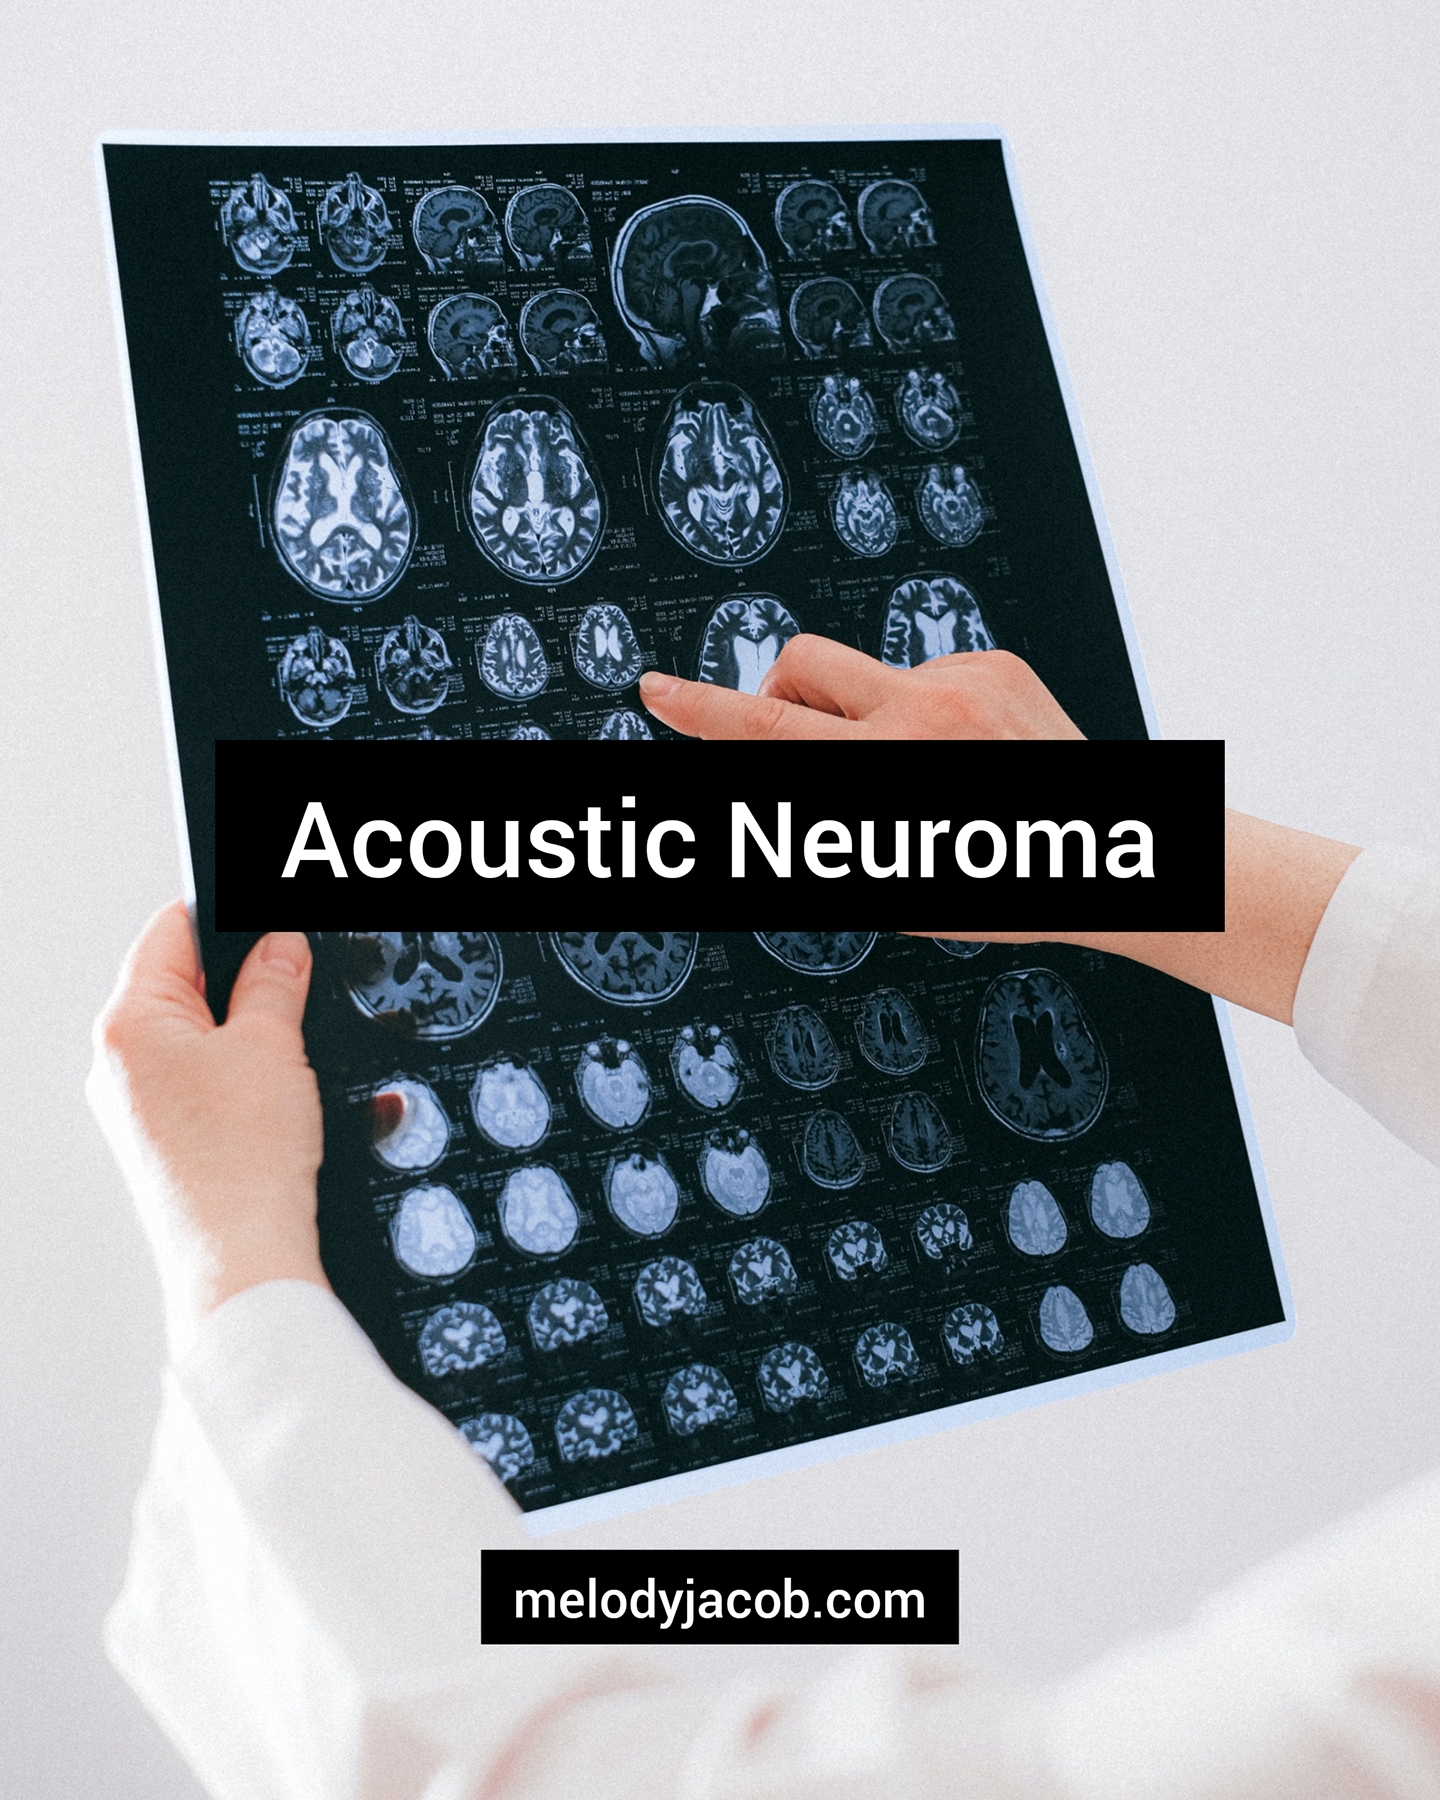 What is Acoustic Neuroma